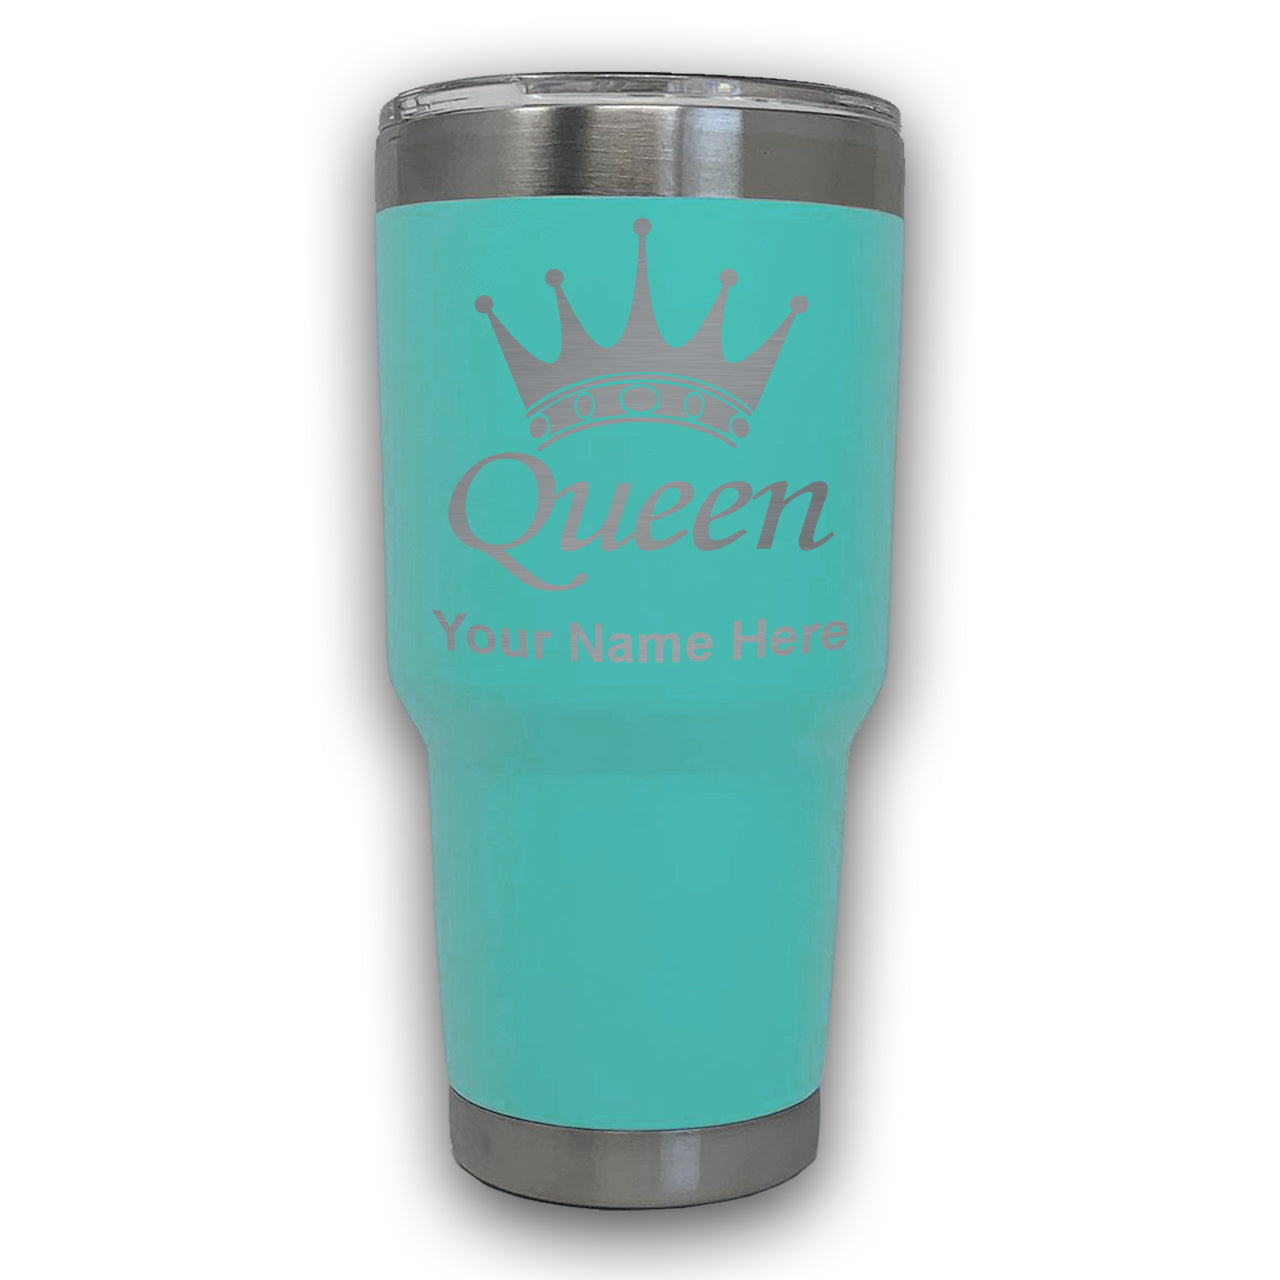 LaserGram 30oz Tumbler Mug, Queen Crown, Personalized Engraving Included